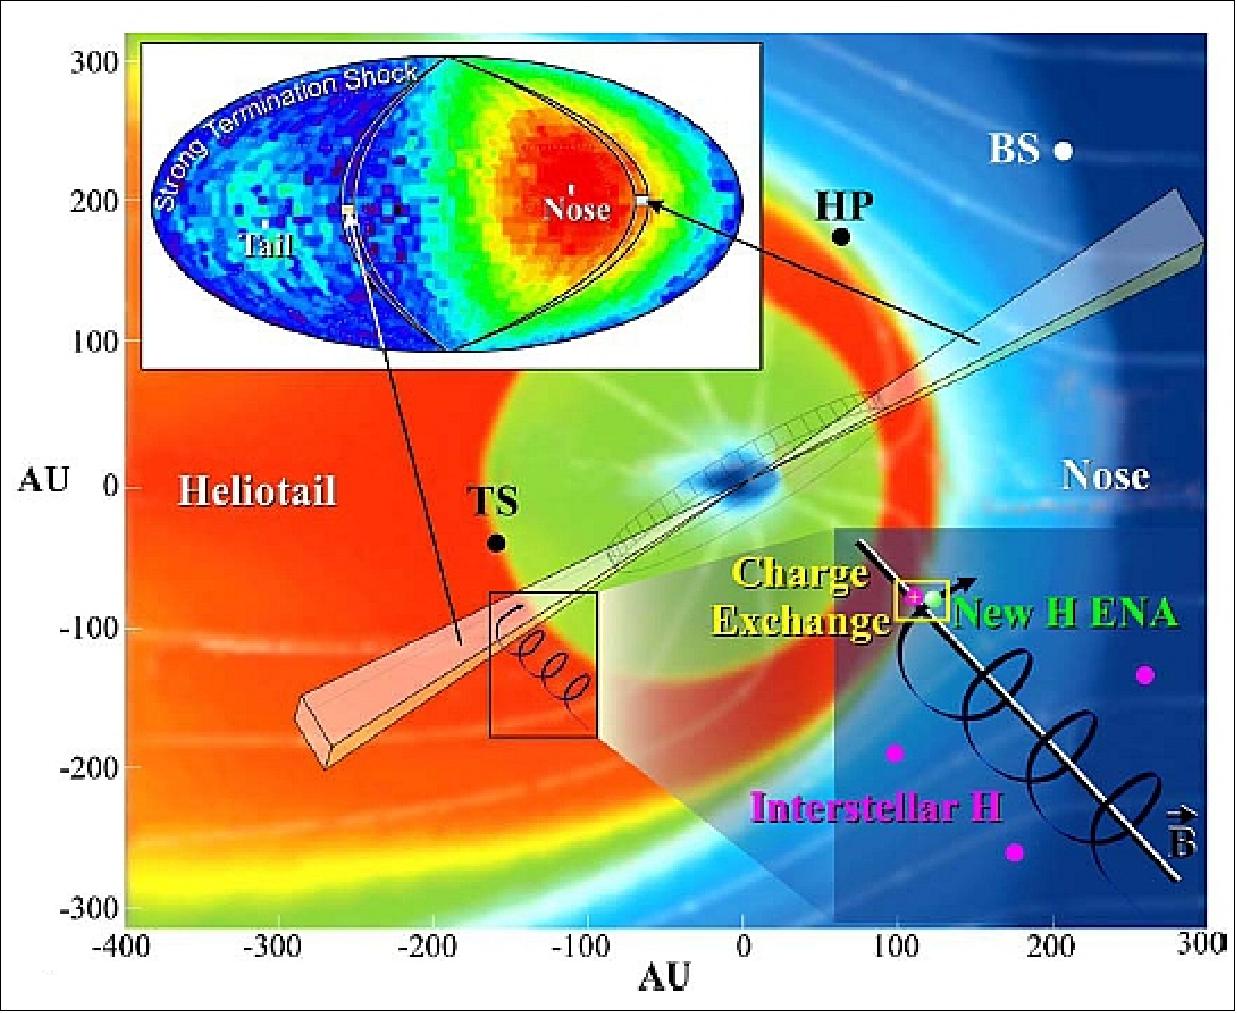 Figure 44: Simulated image of the heliosphere (background image) including from the inside out, solar wind (inner blue and green), termination shock (TS), inner heliosheath and heliotail (orange to yellow and outer green), heliopause (HP), interstellar medium (outer blue) and bow shock (BS), image credit: SwRI